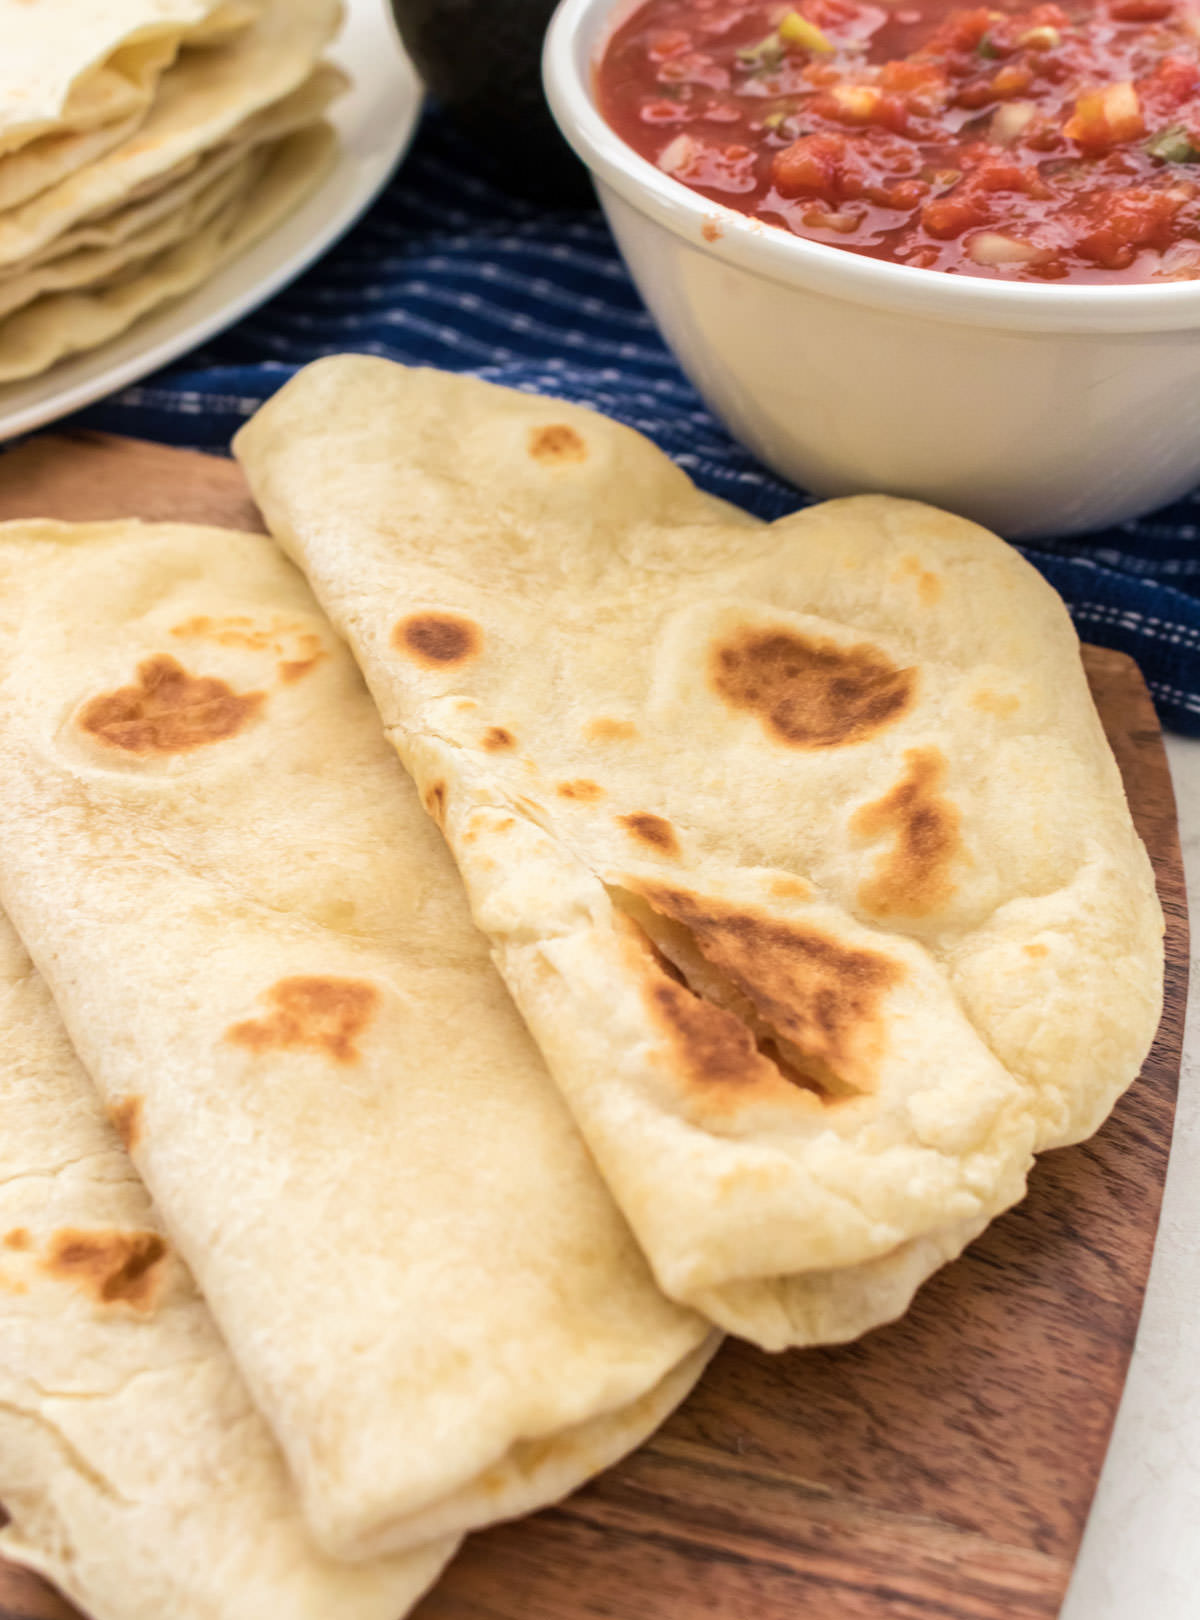 Closeup of three Homemade Flour Tortillas, folded in half, laying on a cutting board in front of a stack of tortillas and a bowl of Pico de Gallo.